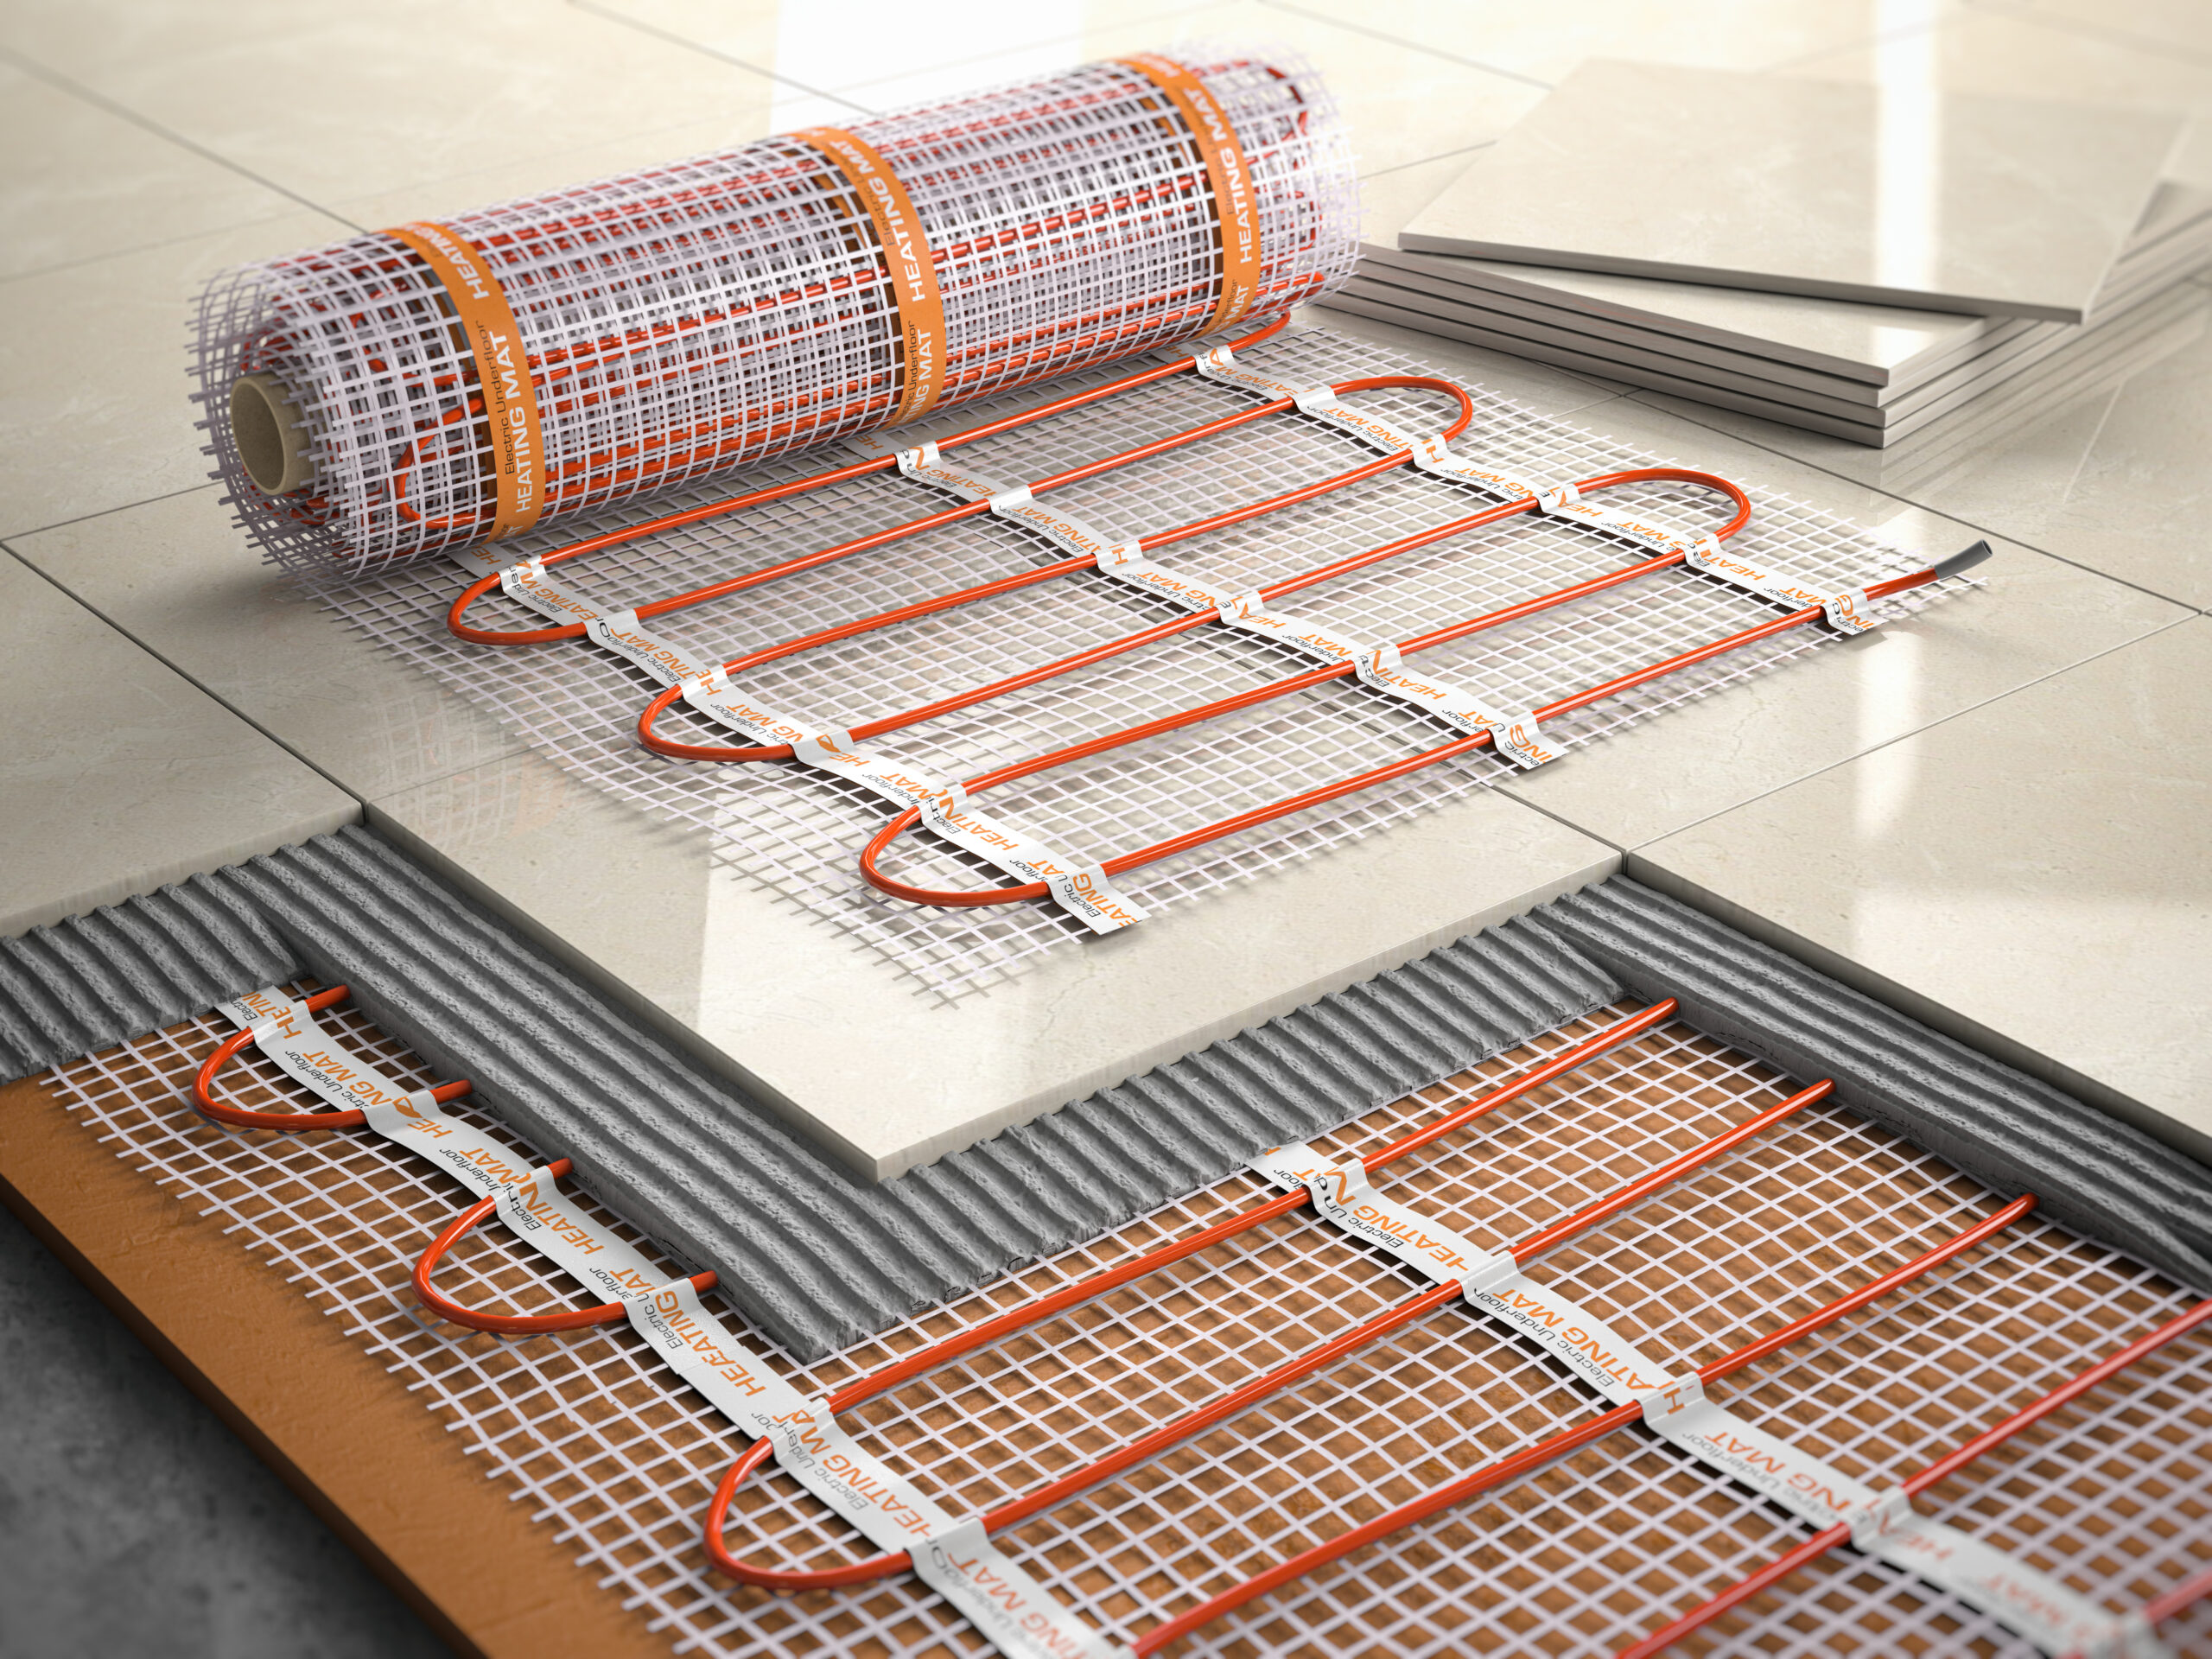 Heating Mats and thermal insulation blankets